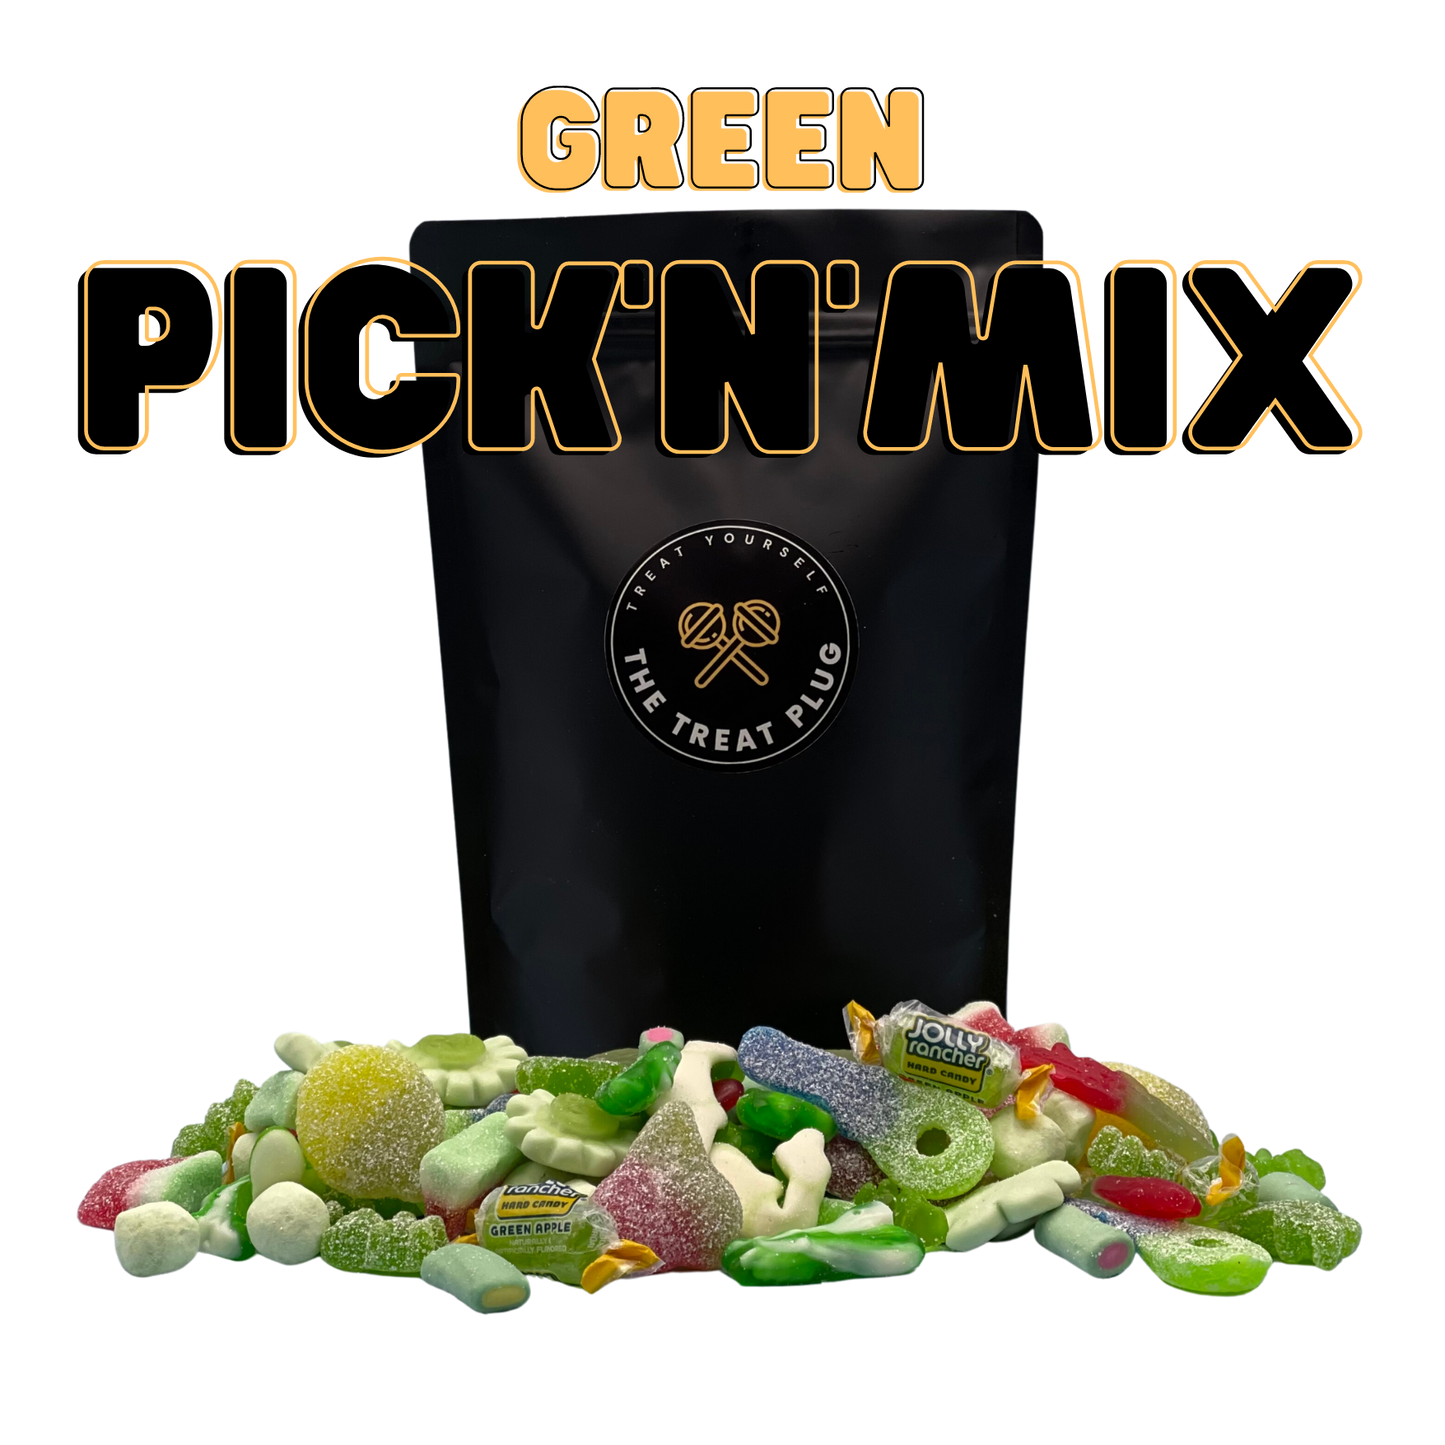 The Green Mix